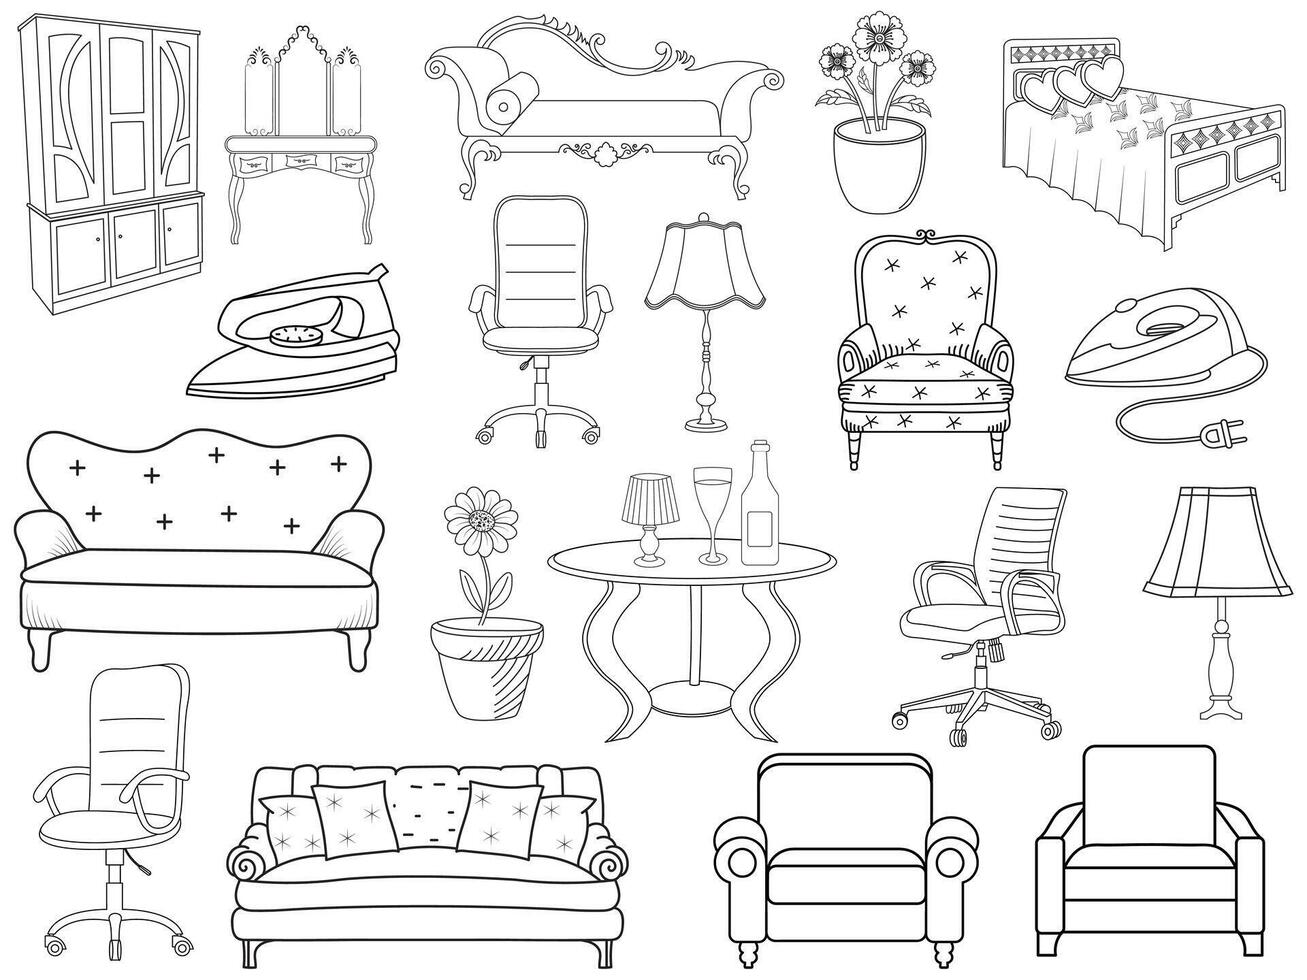 Collection of elegant modern furniture and home interior decorations of trendy. Kitchen, bedroom, sofa table, bookcase closet, chair, mattress, lamps, furniture vector illustration set.